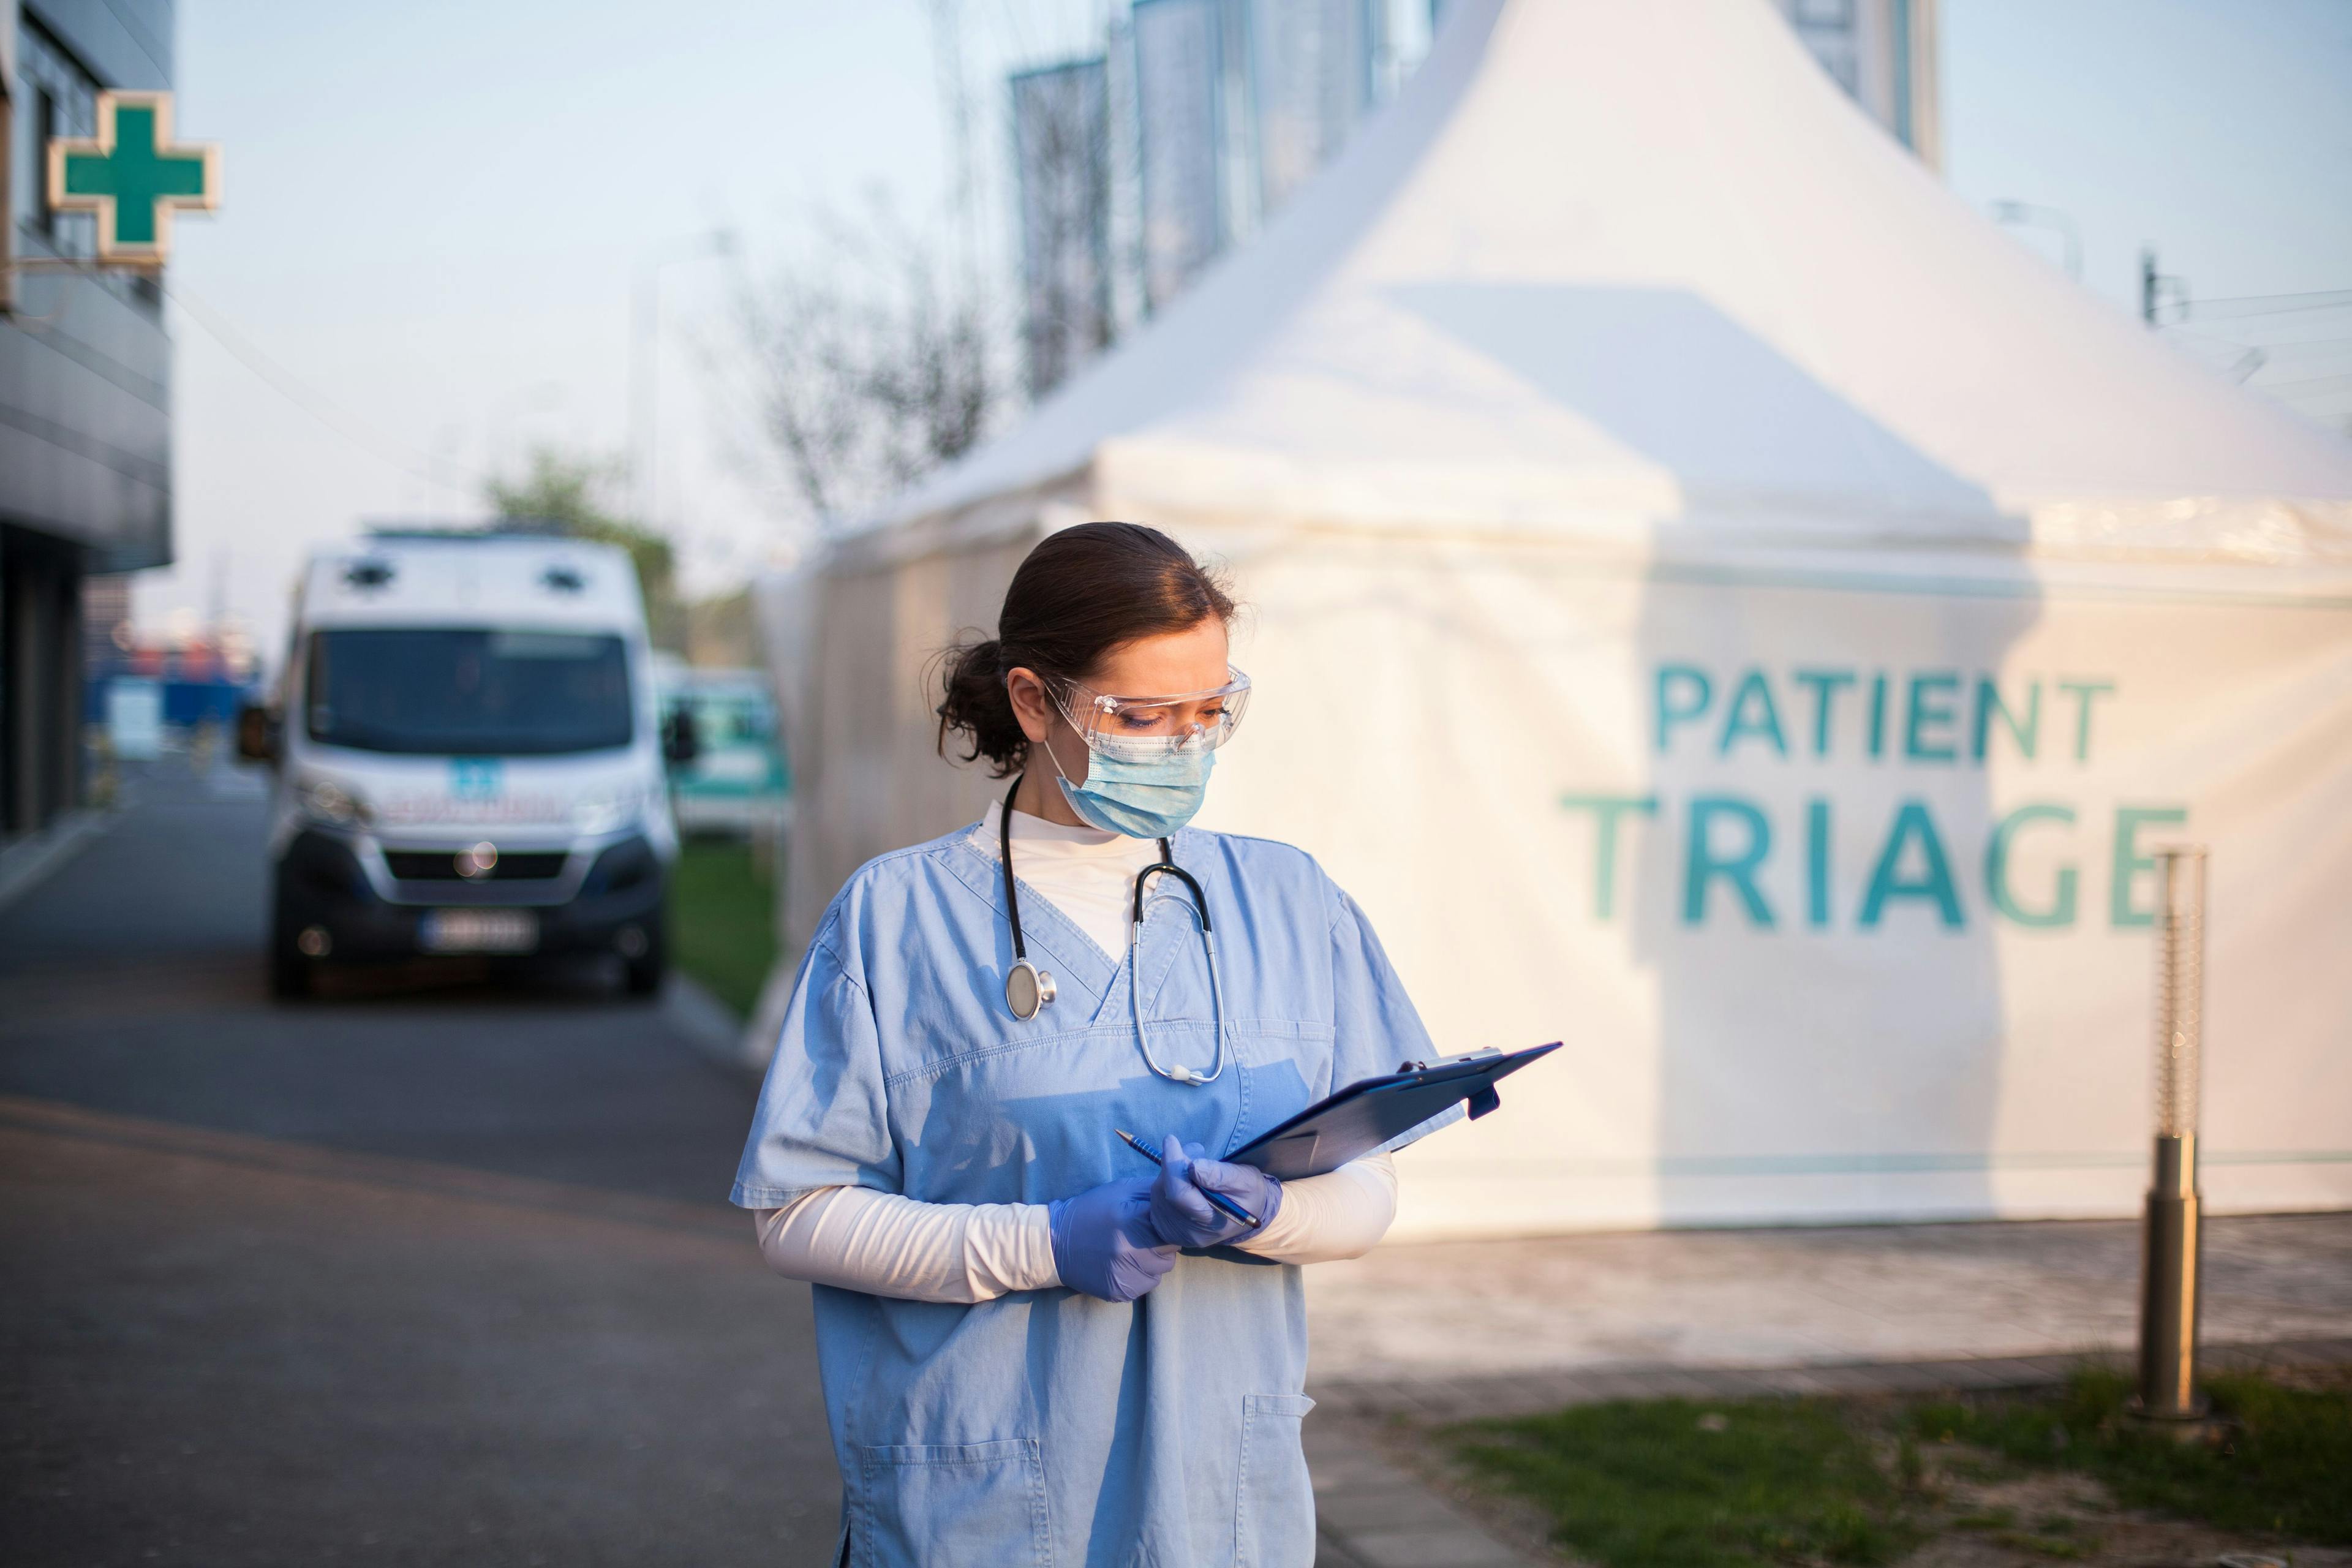 Health care professional with mask on, standing in front of patient triage sign on tent | Imaged credit: ©Milos stock.adobe.com